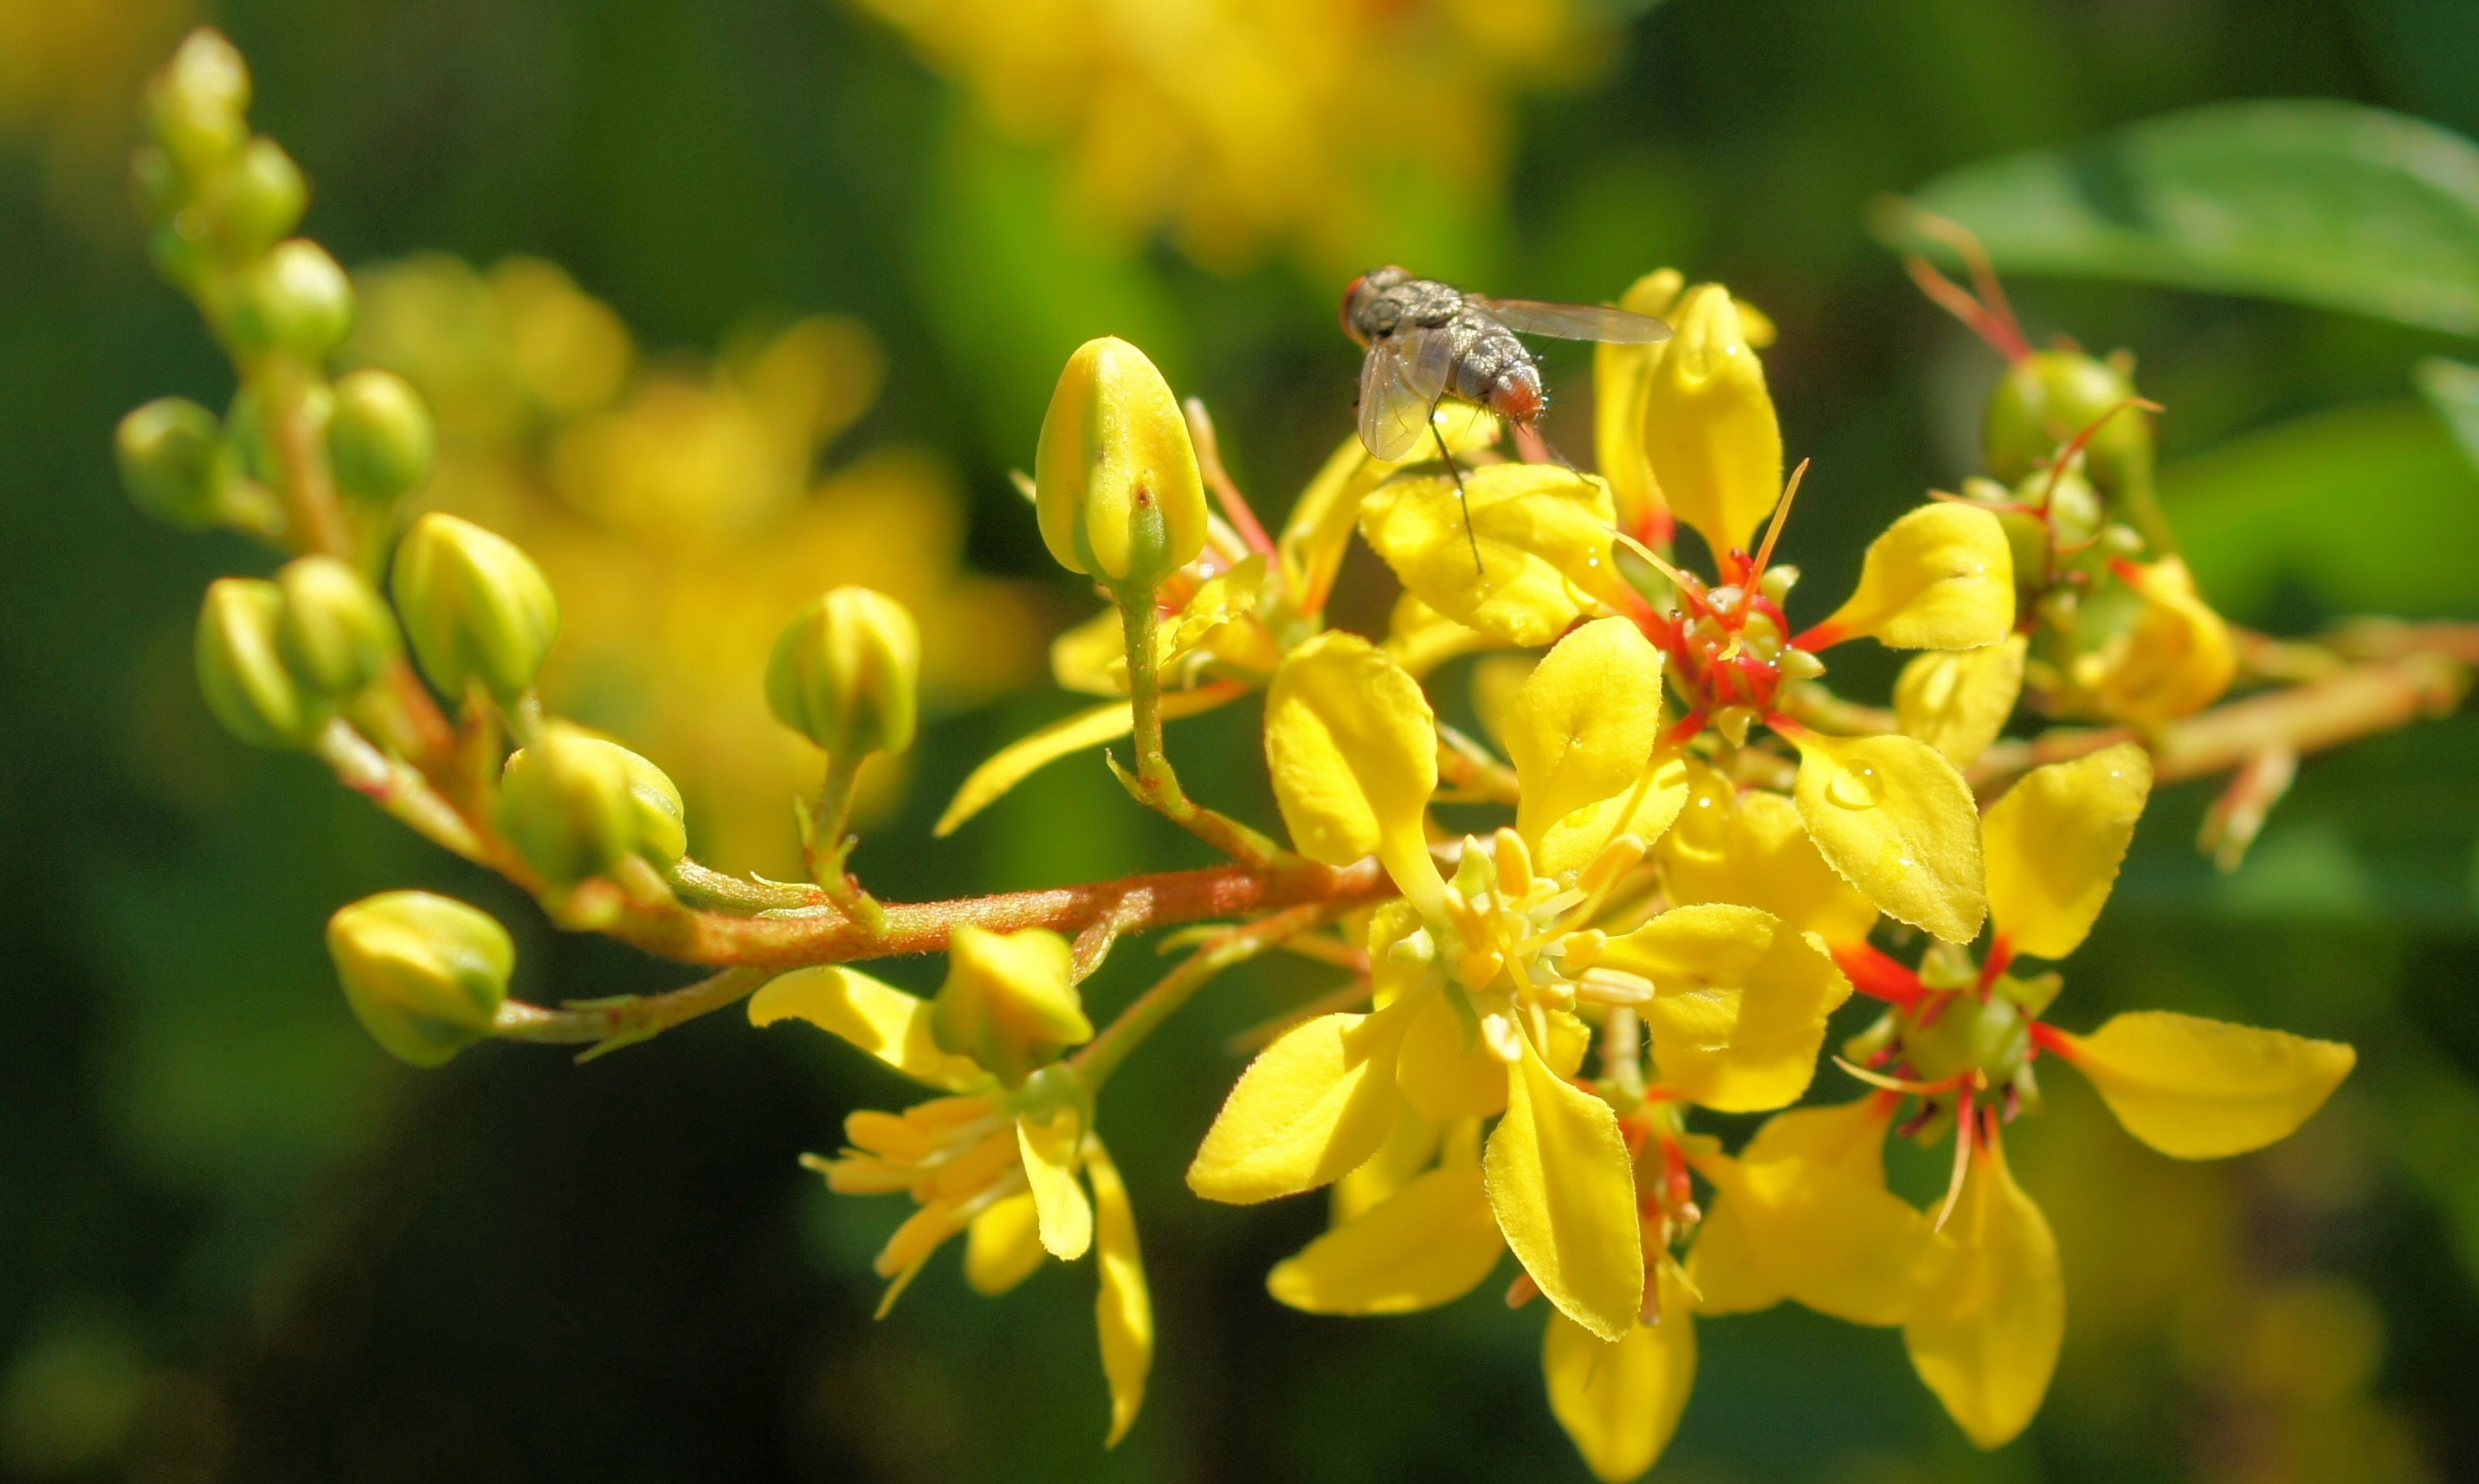 common housefly on yellow petaled flower